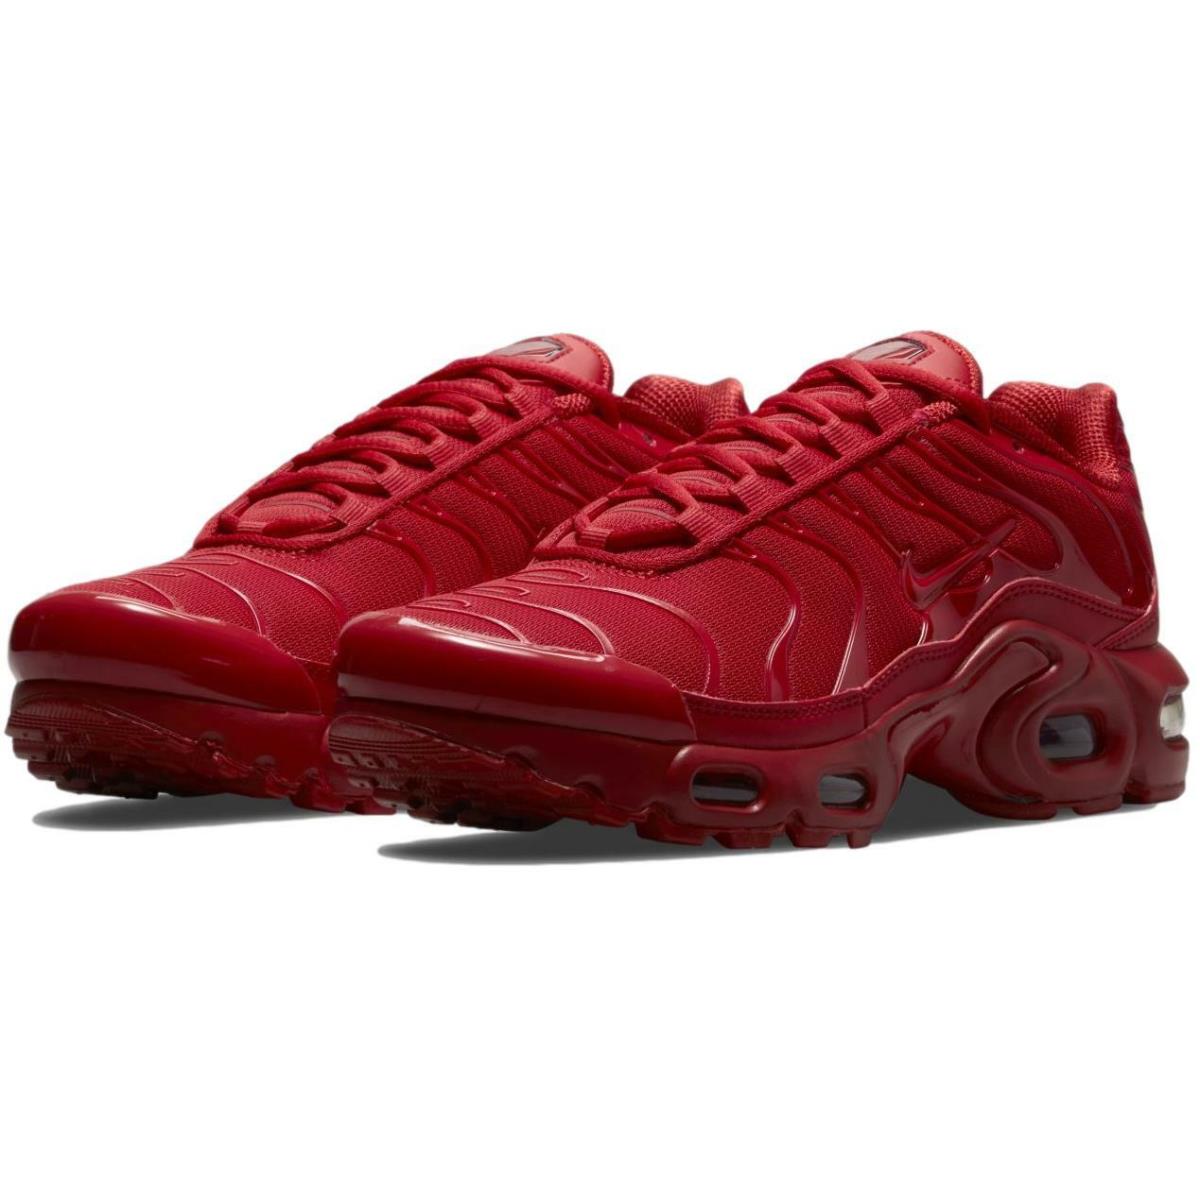 Nike Air Max Plus GS `university Red` Youth Shoes Sneakers DM8877-600 - University Red/University Red